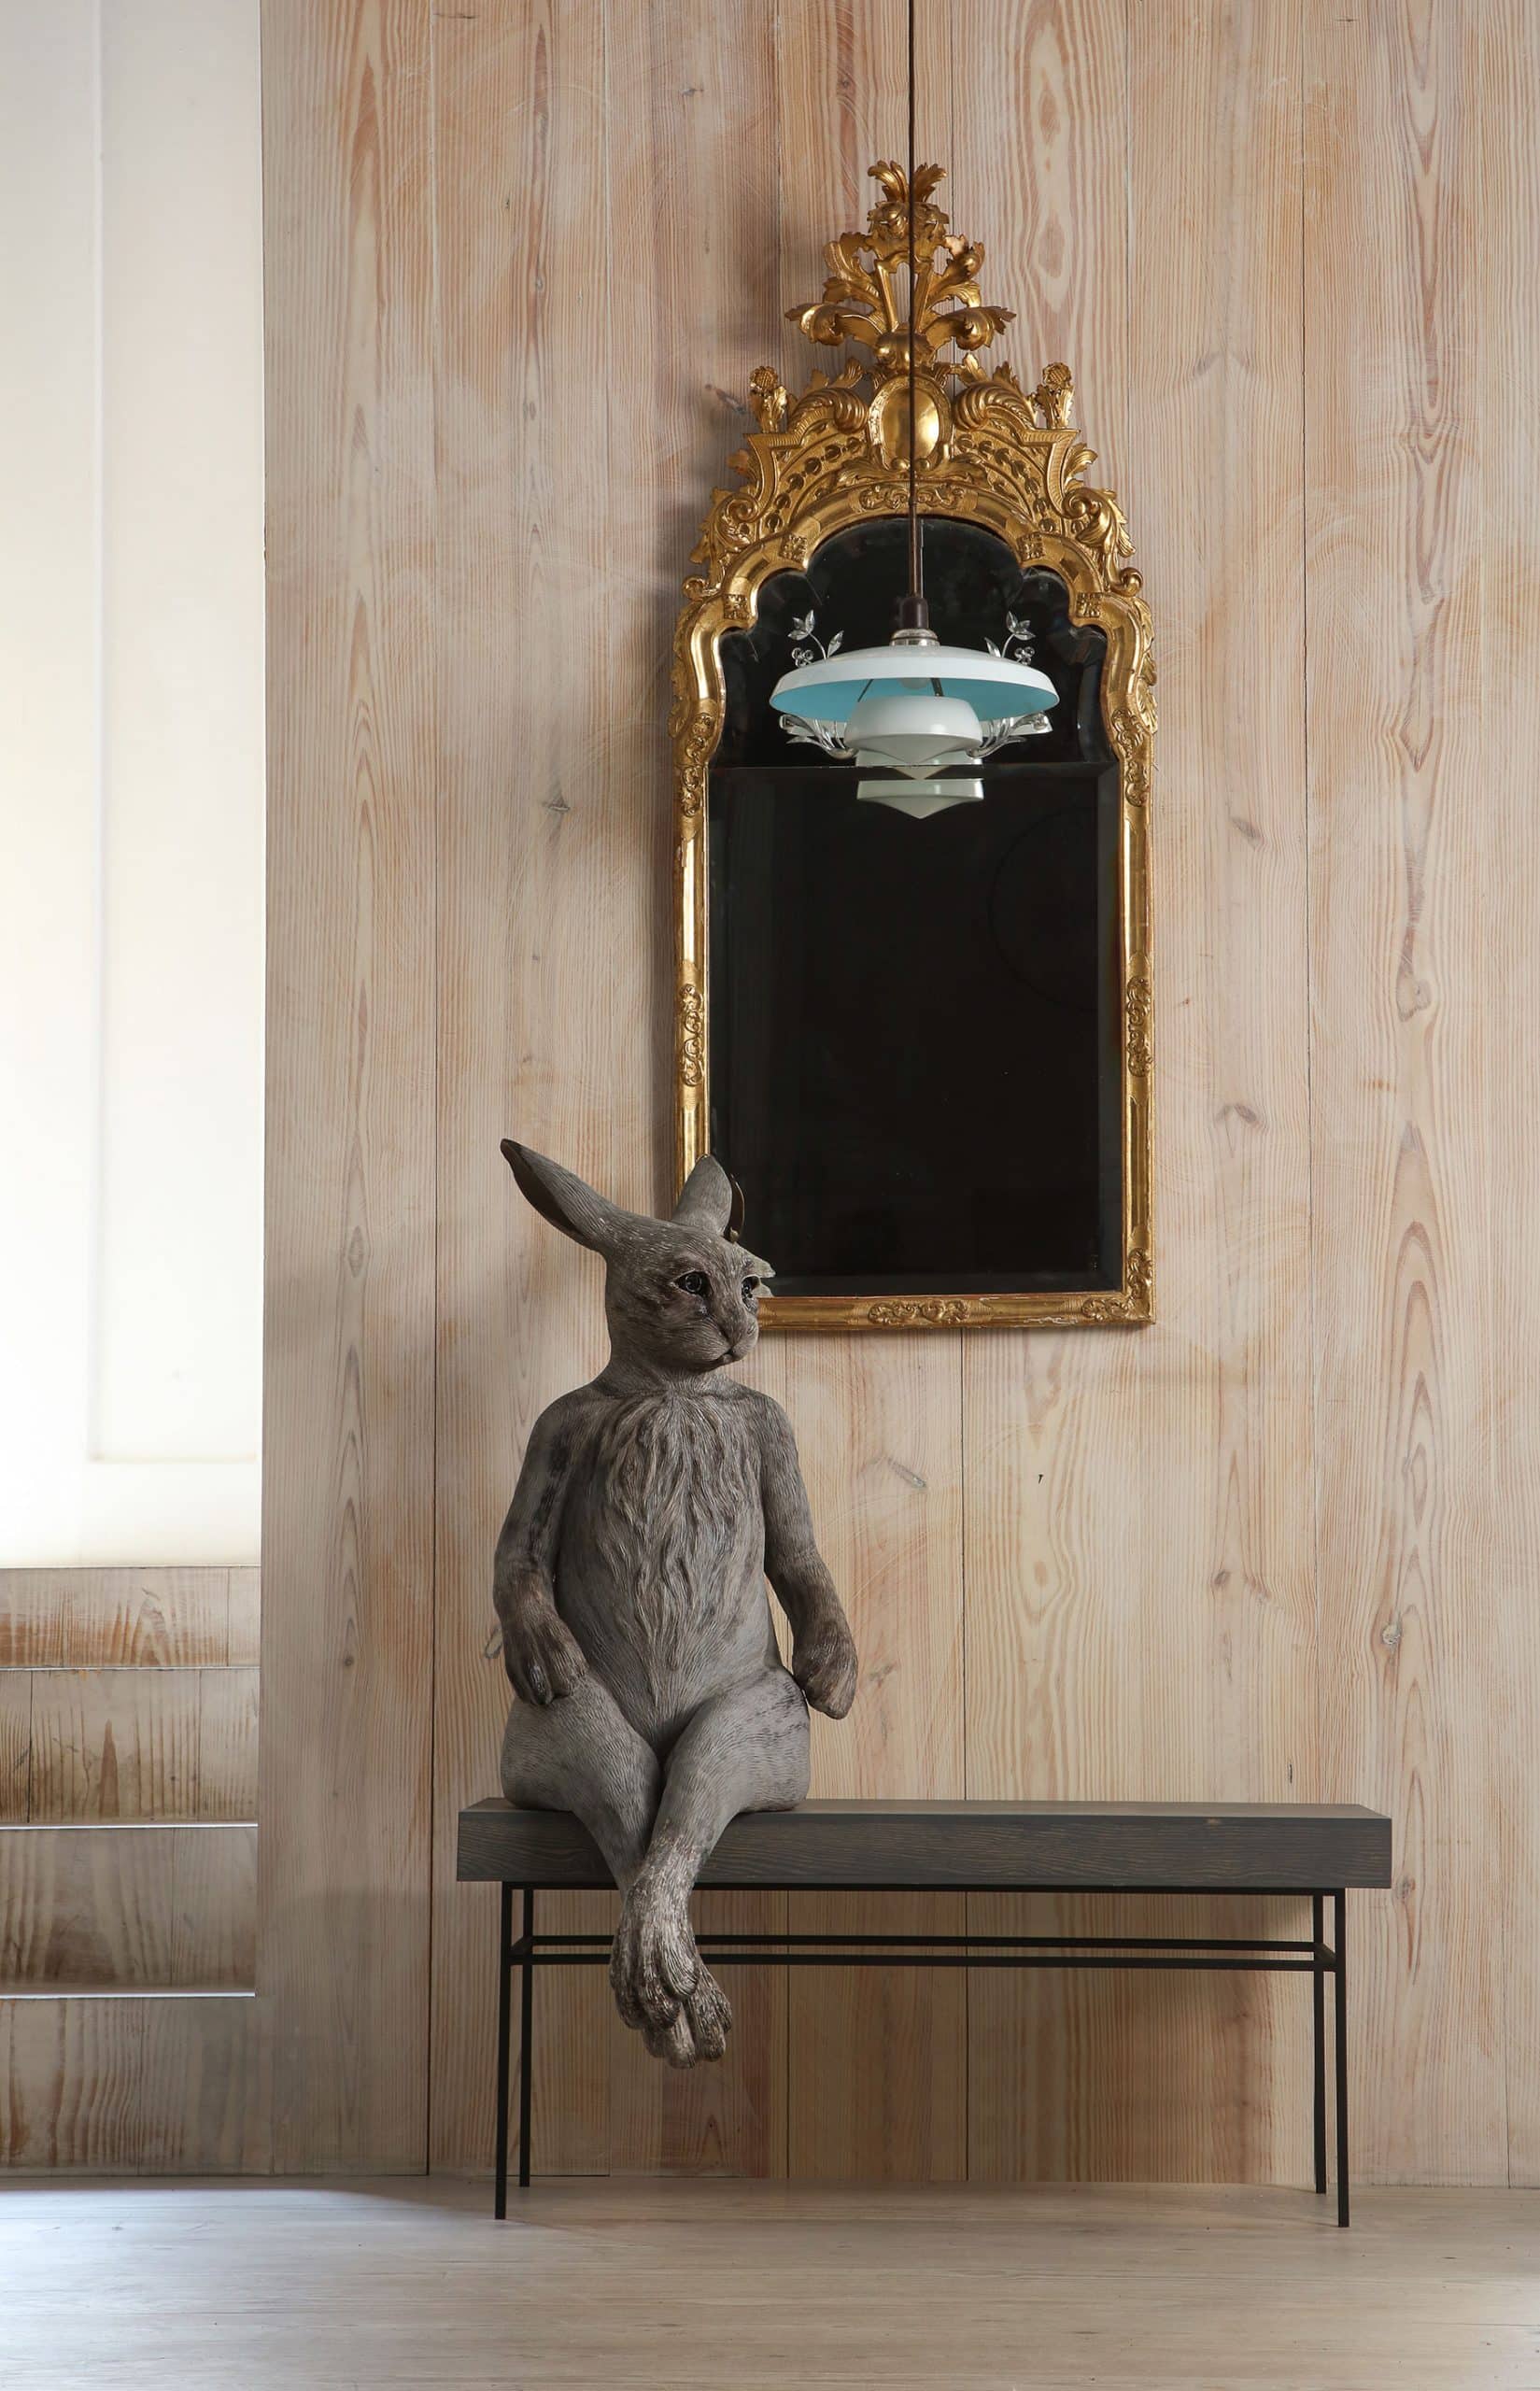 These Human-Size Ceramic Hares Evoke Serious Emotions